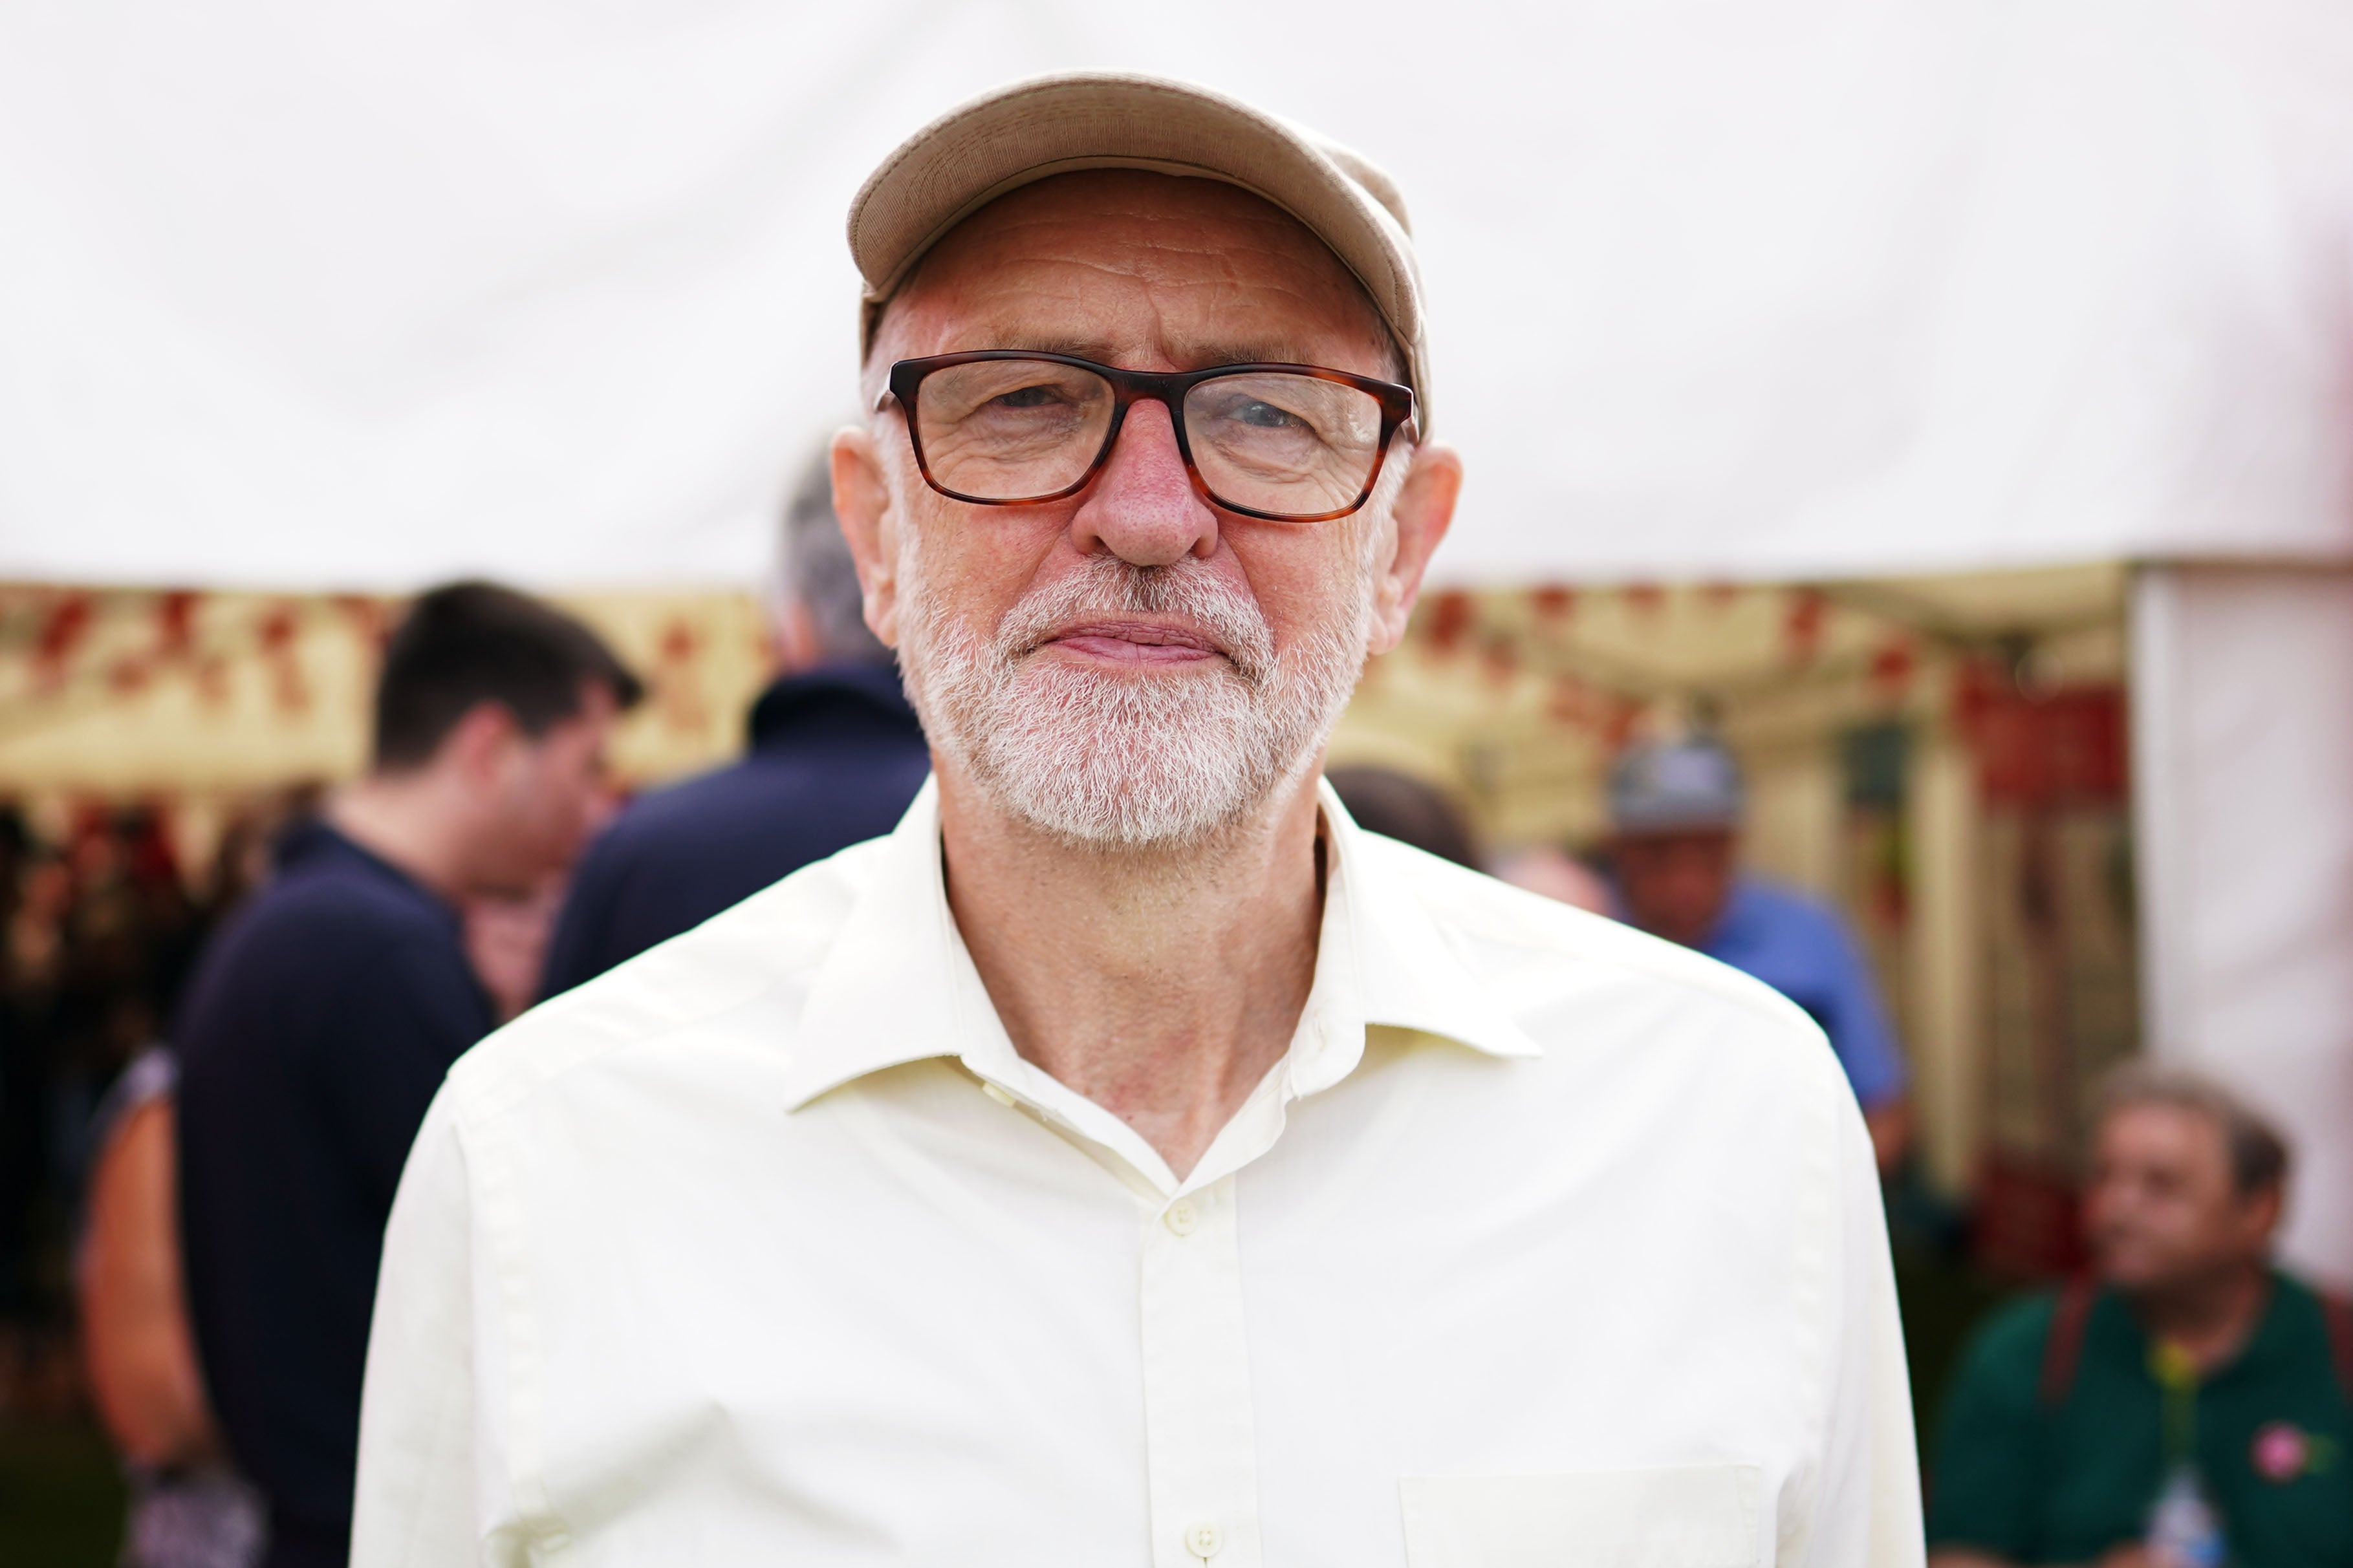 Jeremy Corbyn pictured at the Durham Miners Gala on 9 July, 2022